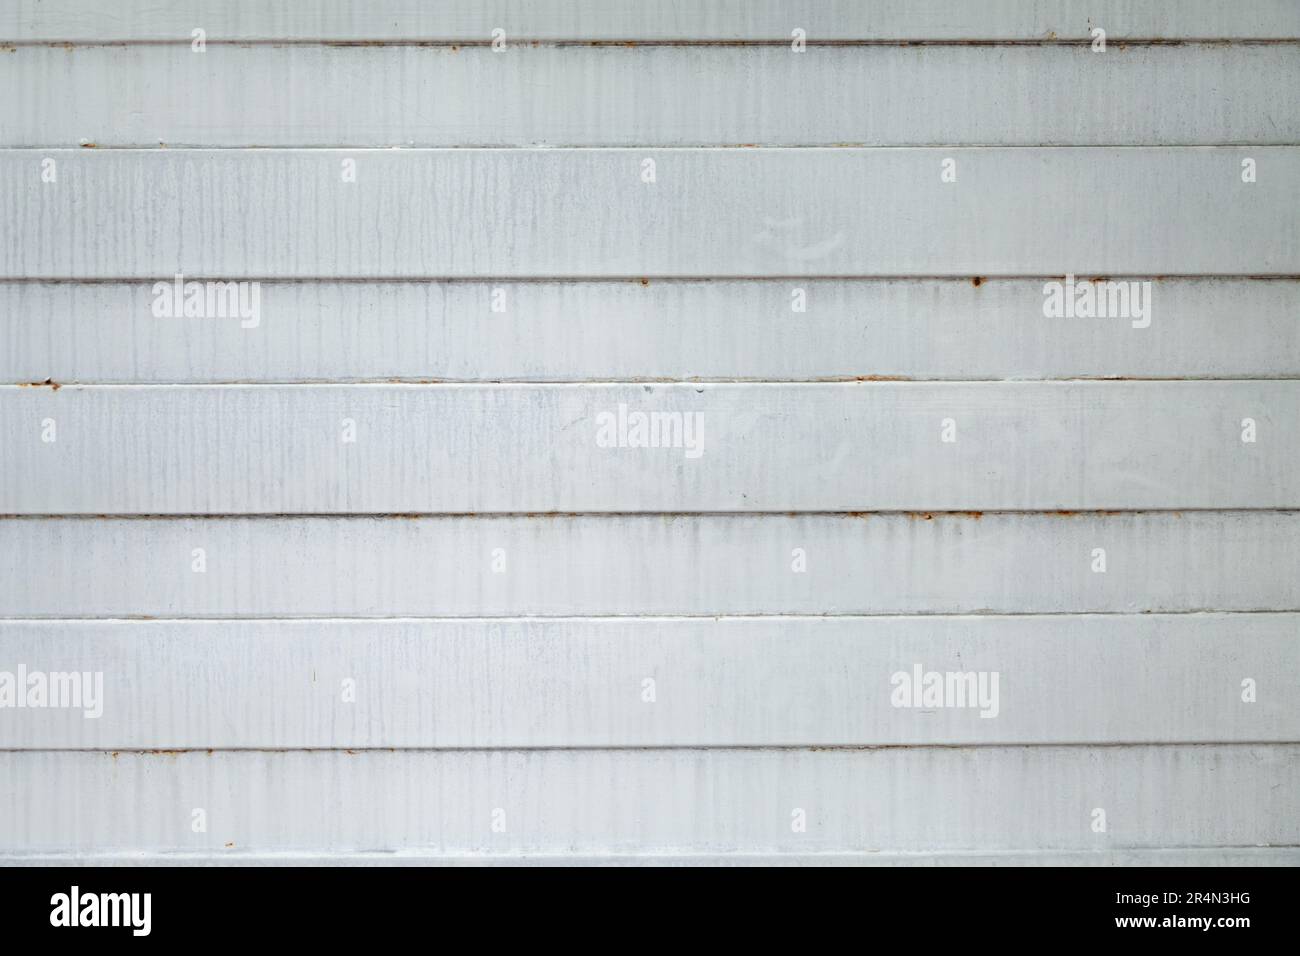 Gray painted surface of a corrugated metal gate with ridges and grooves. Old stained metallic wall with a simple geometric pattern of horizontal lines Stock Photo